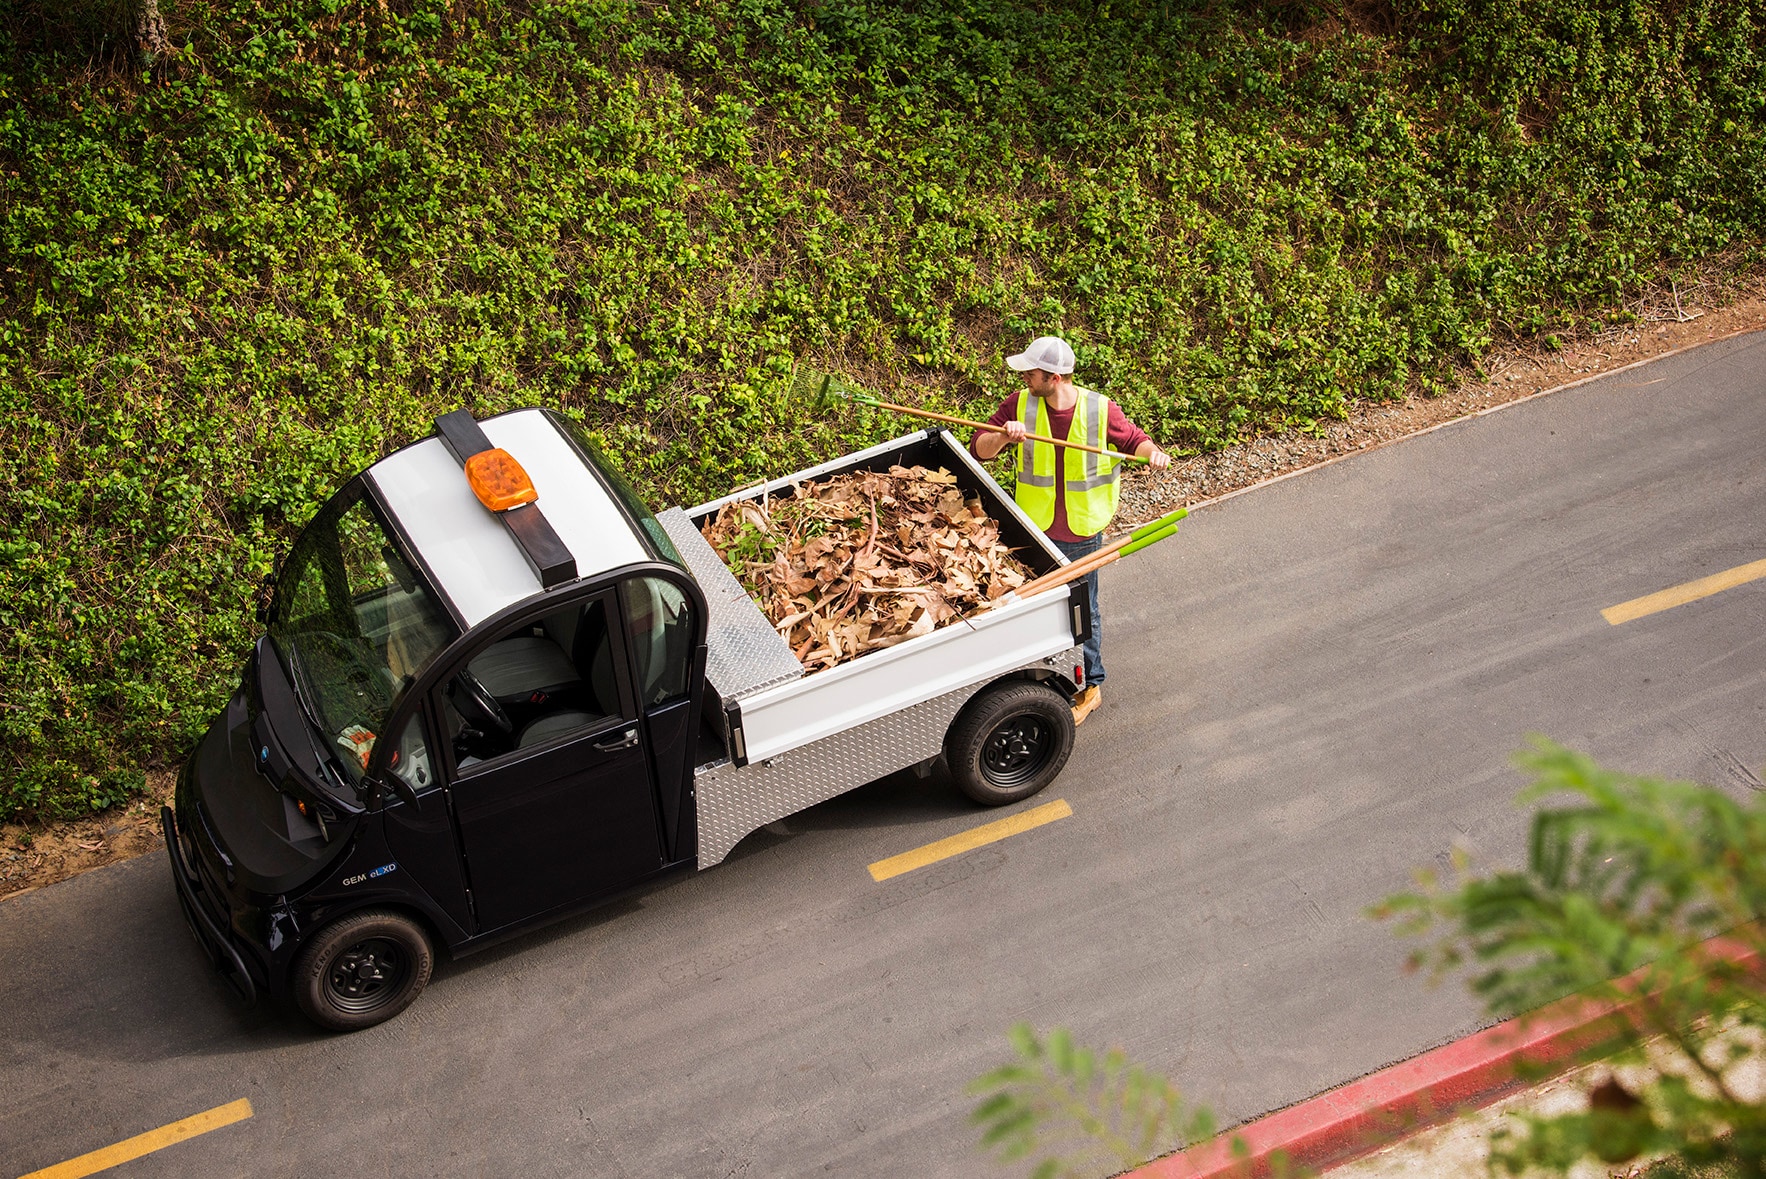 Rival any truck or cargo van with GEM eL XD. Up to 1,400 lbs of payload and 1,250 lbs of towing.